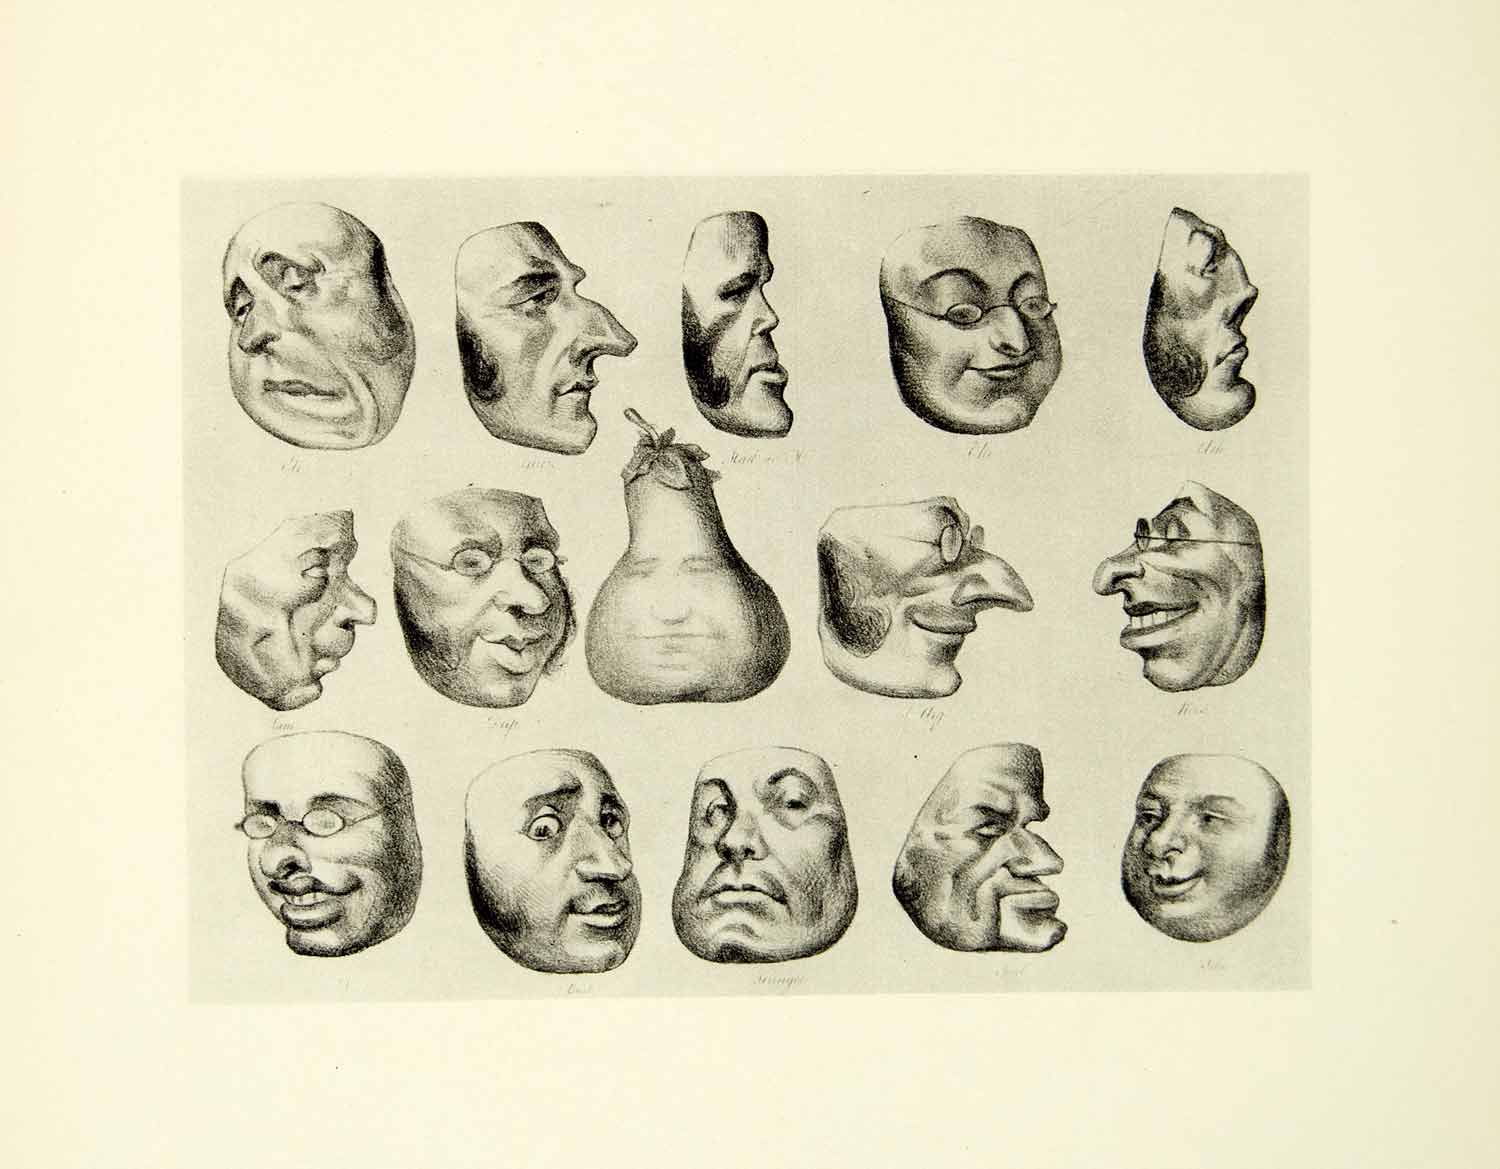 1938 Rotogravure Masques Masks Honore Daumier Faces Shape Pear Nose Glasses XDI8